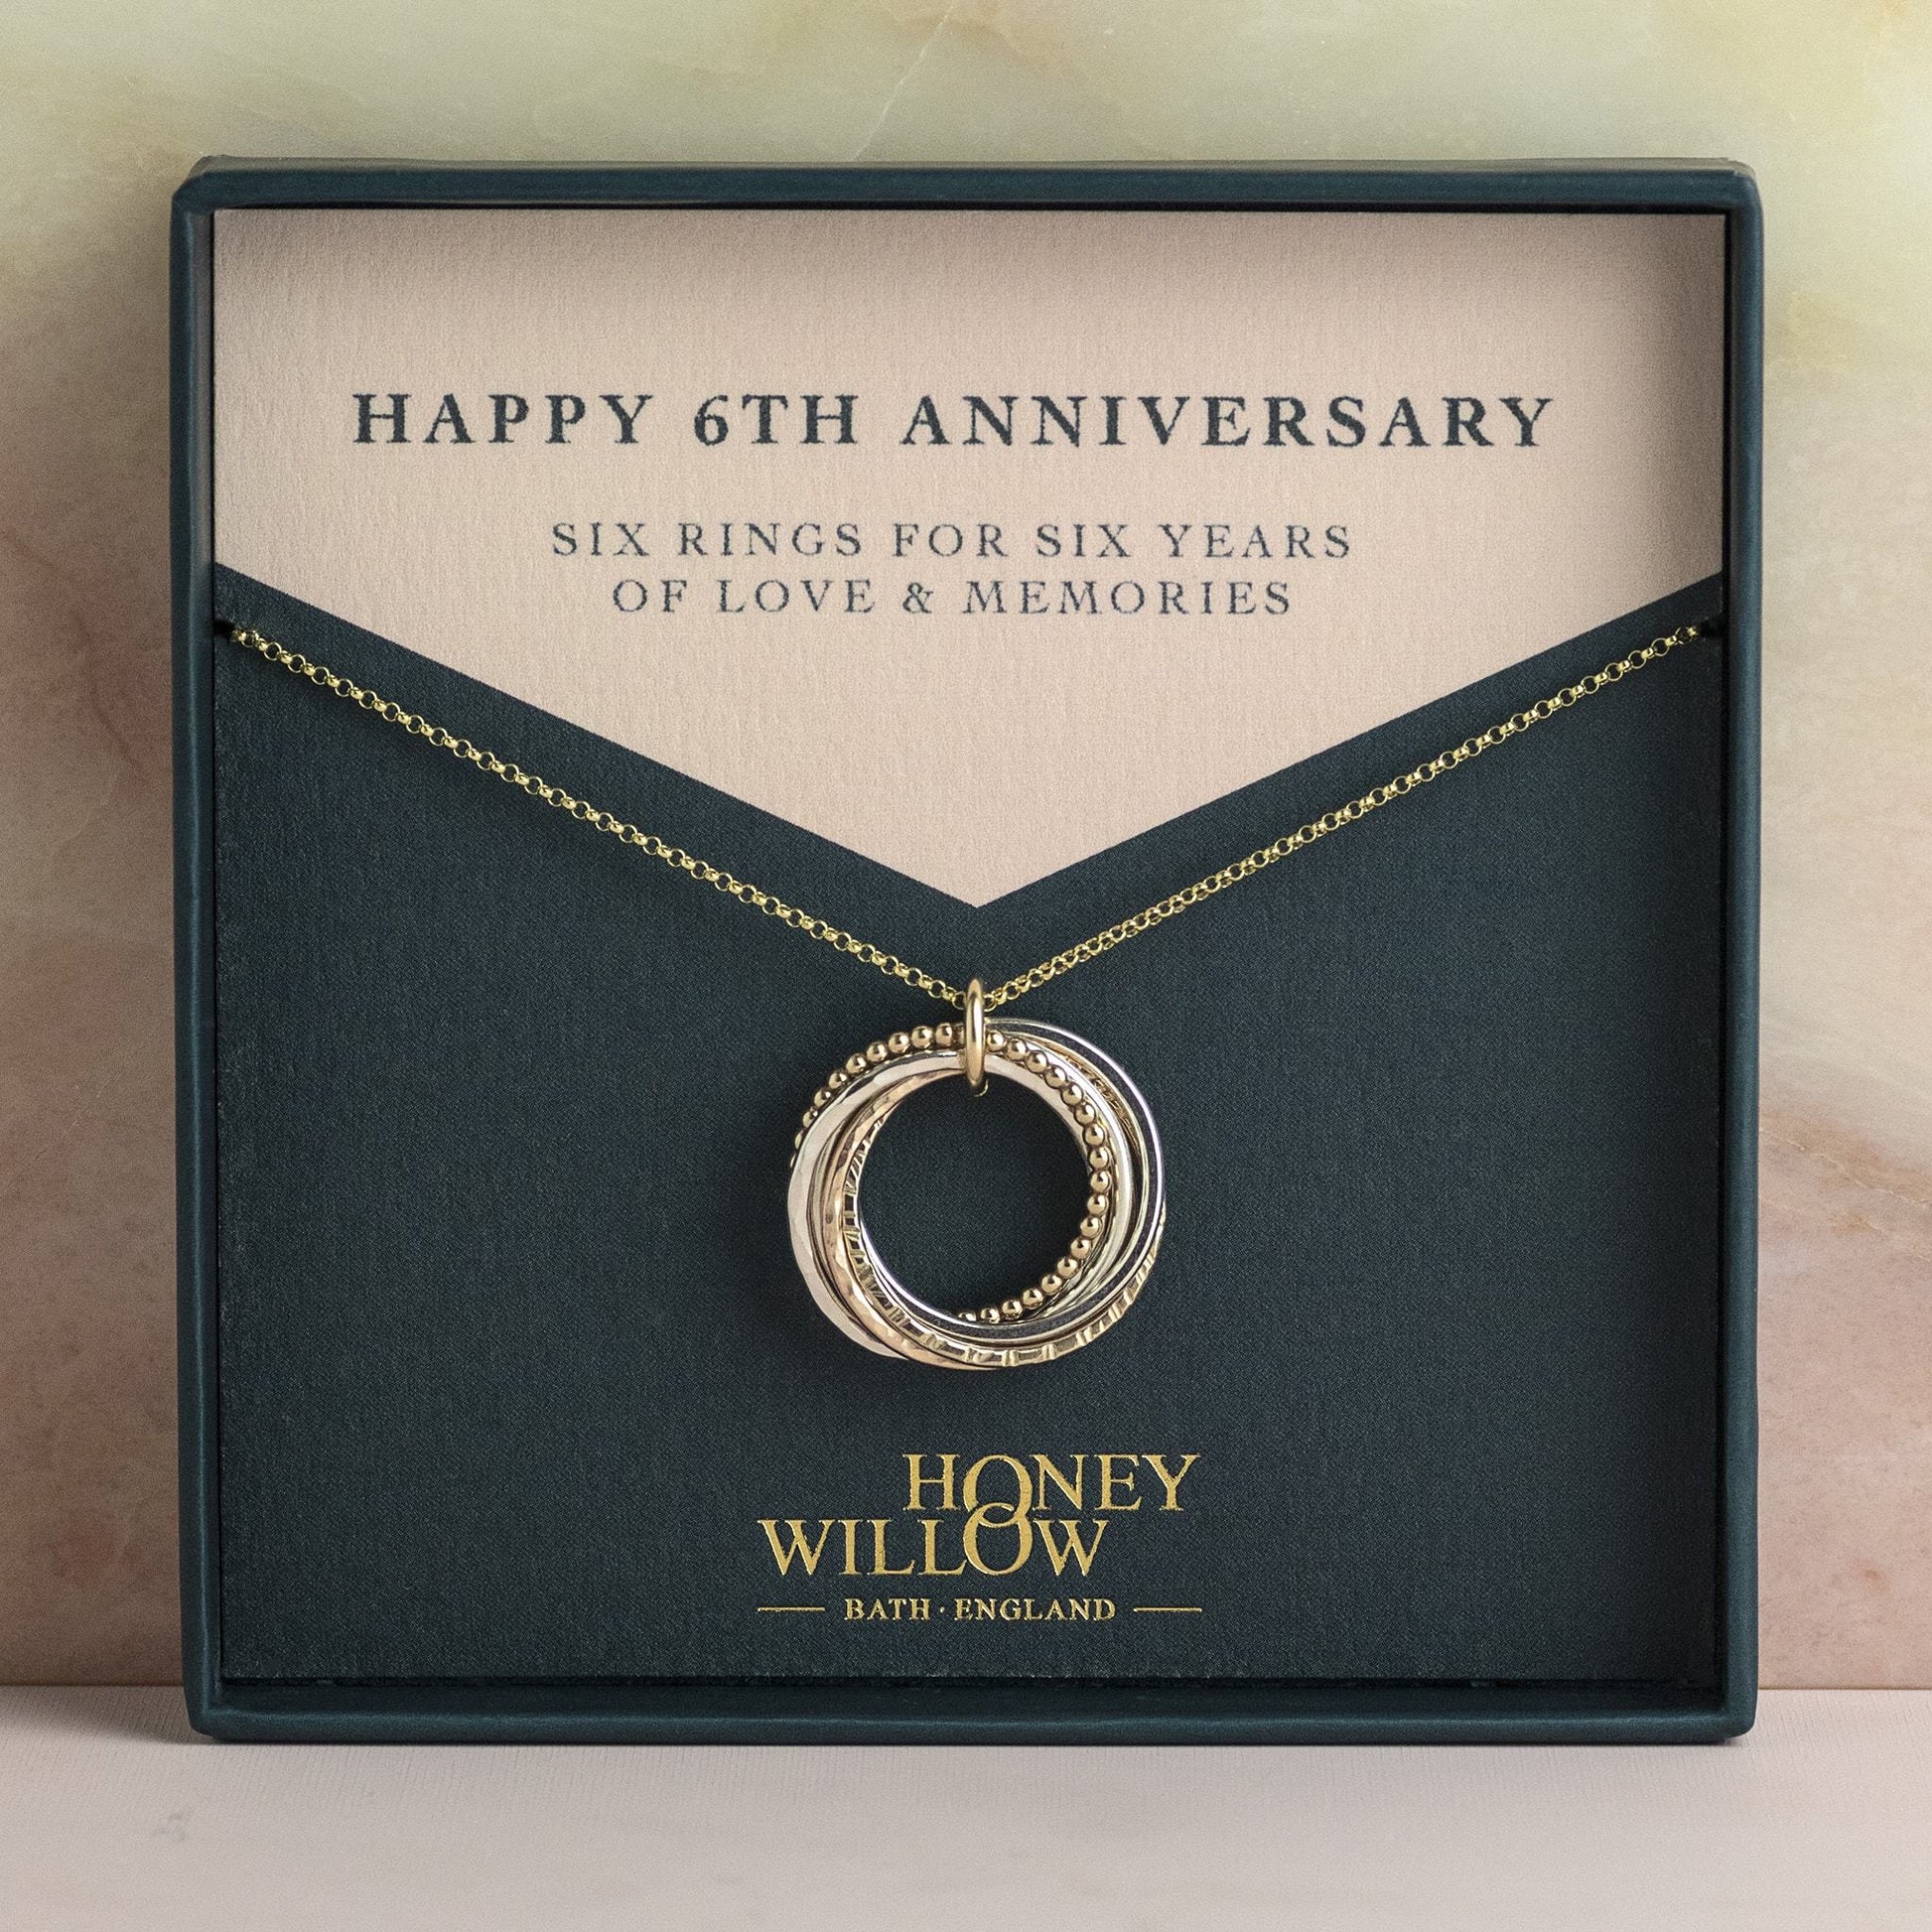 9kt Gold 6th Anniversary Necklace -  The Original 6 Links for 6 Years Necklace - Recycled Gold, Rose Gold & Silver